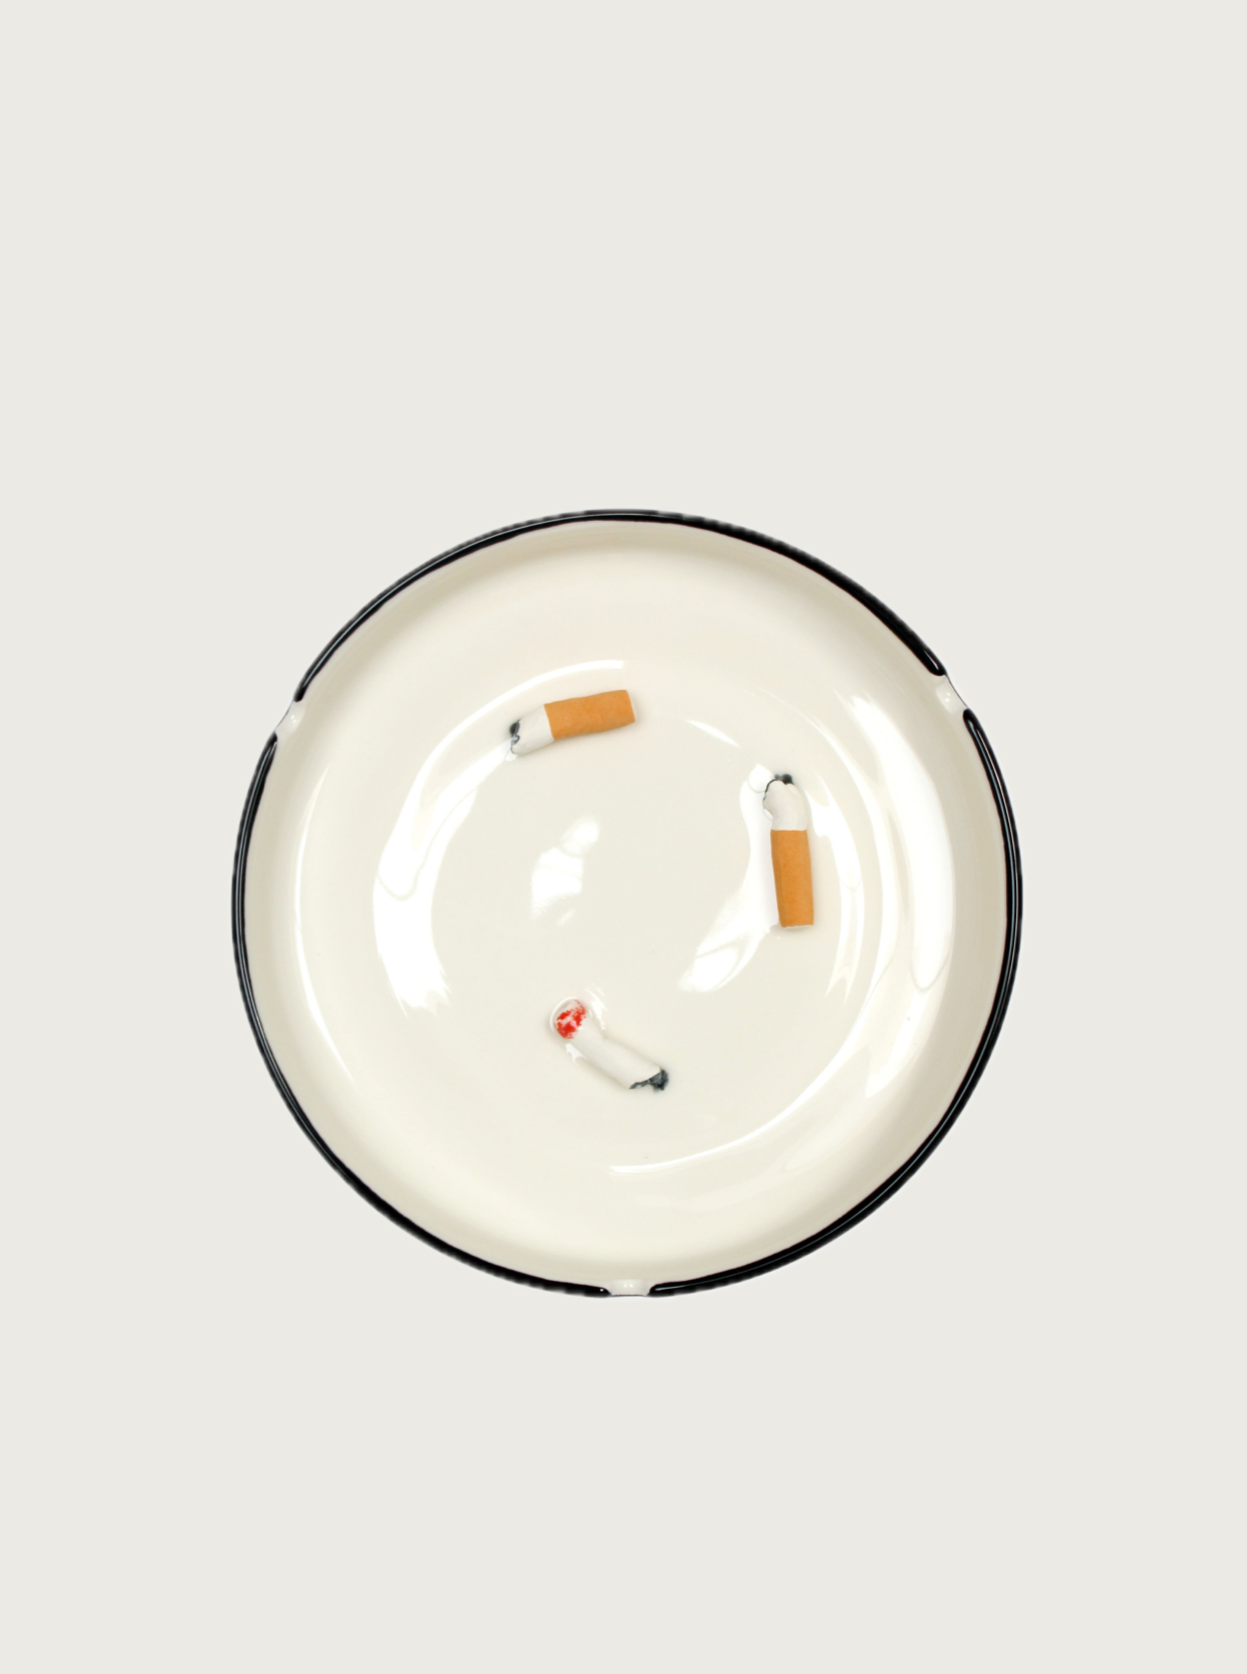 A white ceramic earthenware Villa Arev Cigarette Butts Ashtray with a black rim contains three cigarette butts, one of which is still slightly lit. The butts are scattered randomly within the ashtray on a light gray background, reminiscent of tranquil moments at Villa Arev during a Mediterranean getaway.